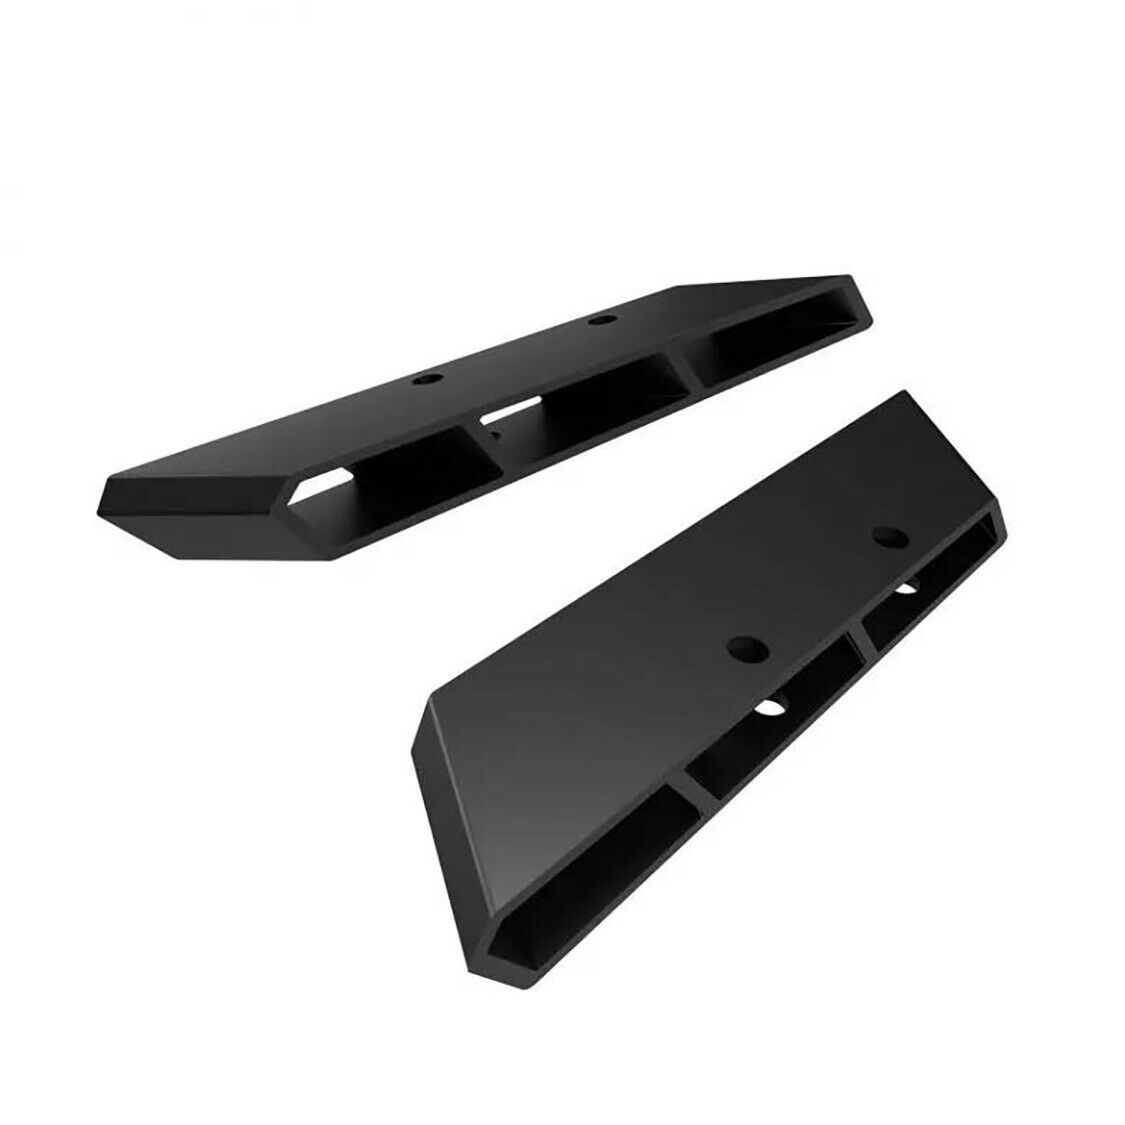 Ski-Doo Shims for LinQ Accessories 860201432